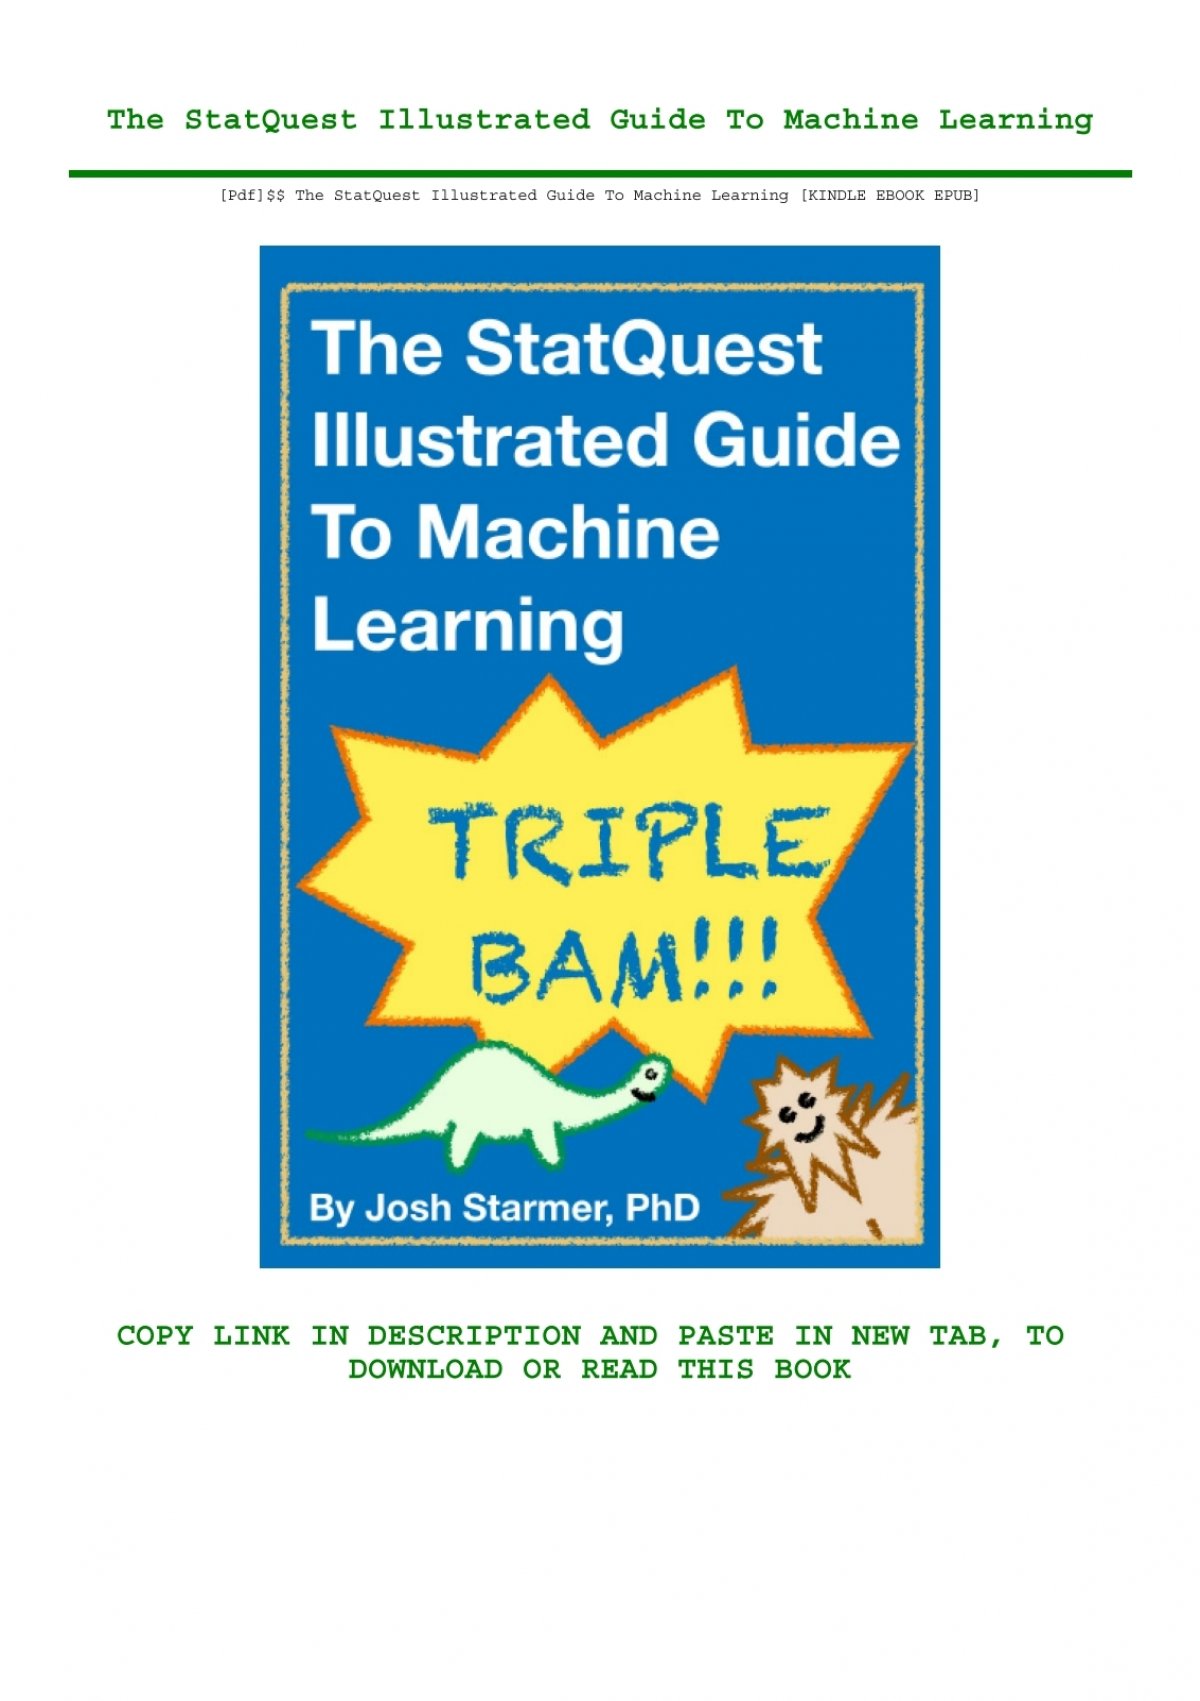 the statquest illustrated guide to machine learning pdf download